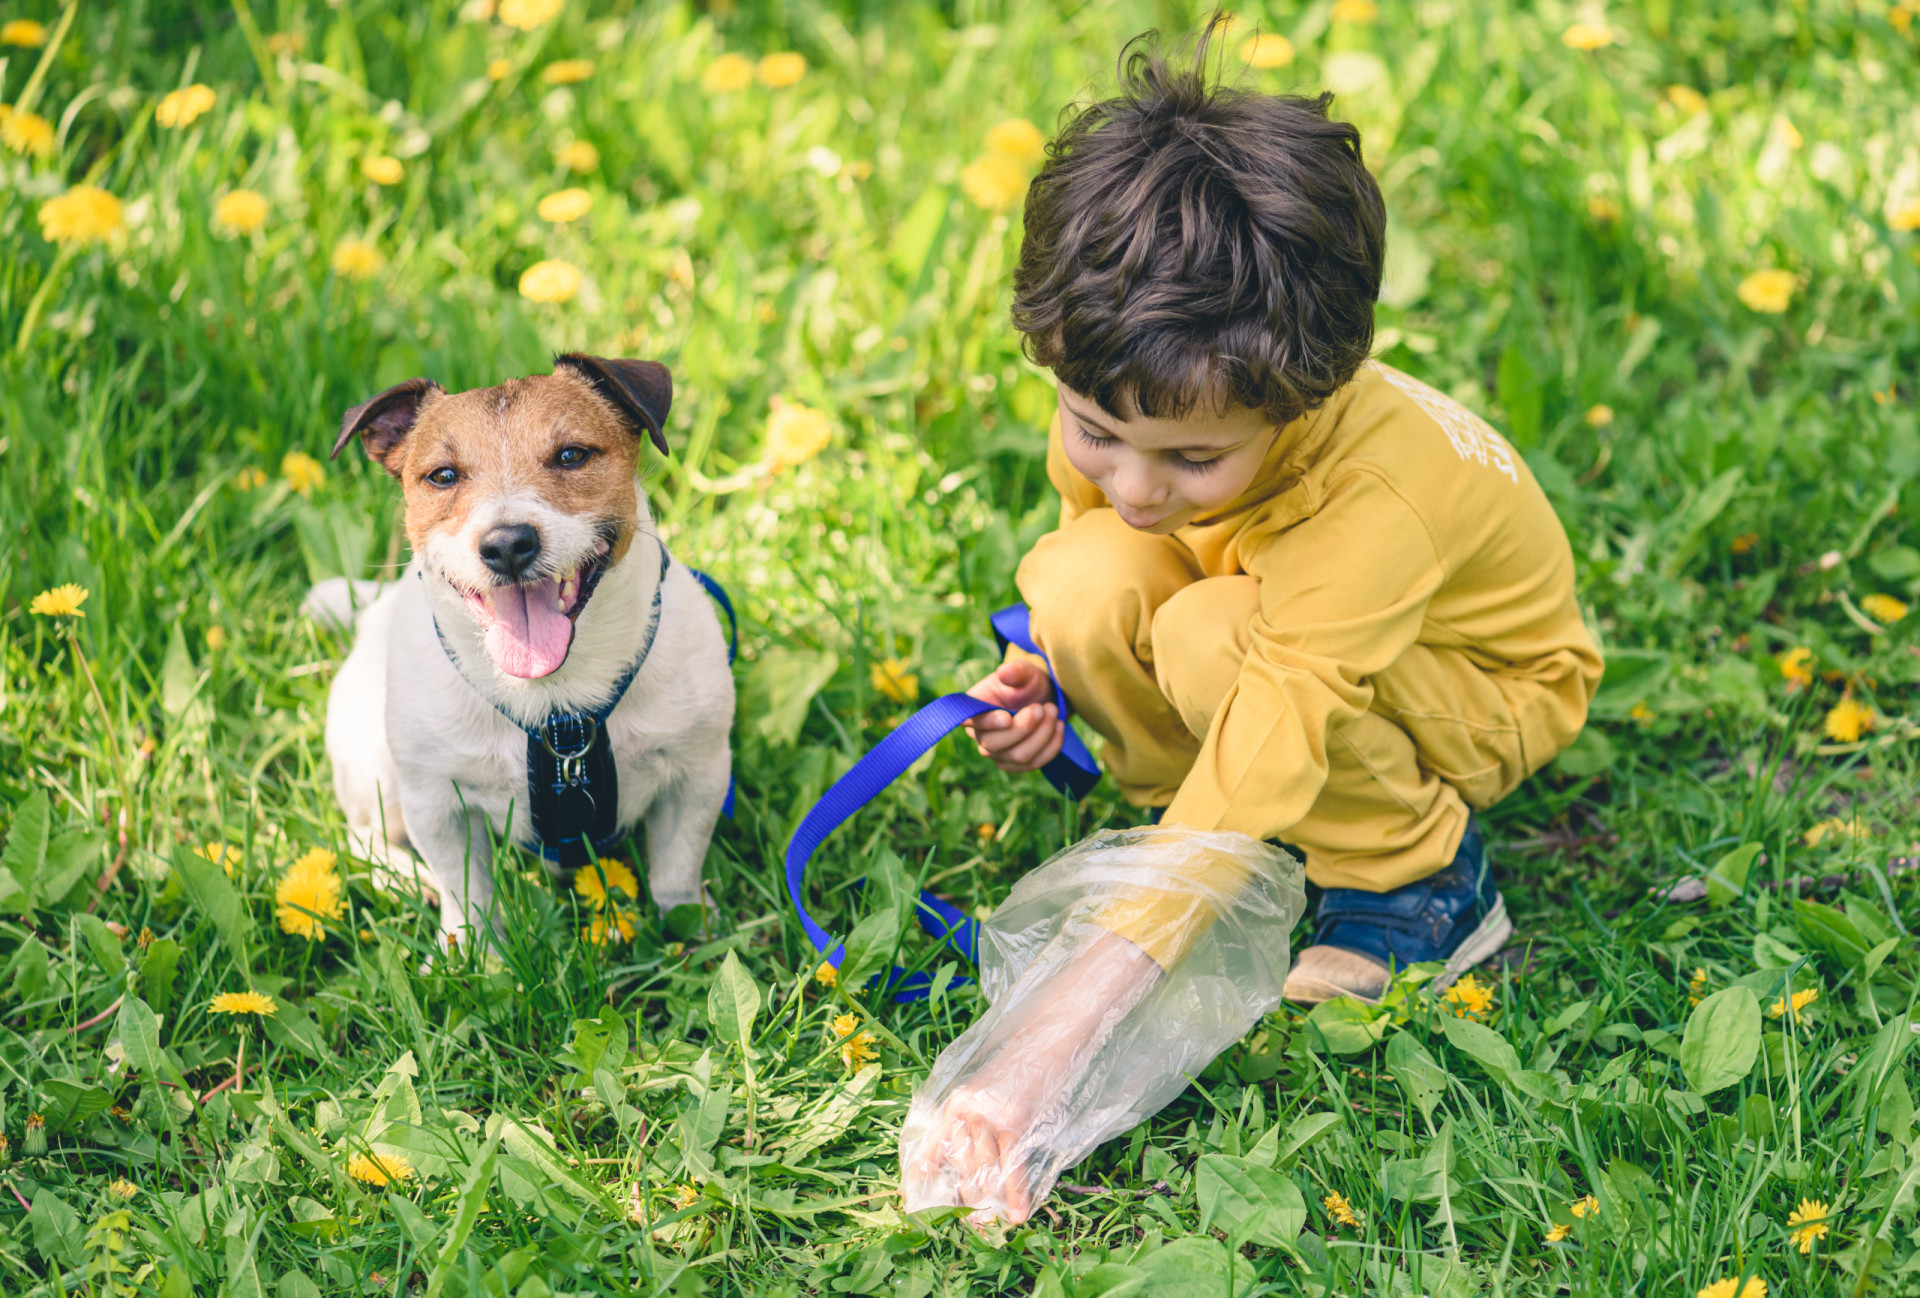 <p>Teaching kids to clean up after their pets is more than just a chore; it's a lesson in responsibility for the environment and the well-being of their furry companions.</p><p>You may also like:<a href="https://www.starsinsider.com/n/241133?utm_source=msn.com&utm_medium=display&utm_campaign=referral_description&utm_content=588009en-en"> The most insane rescue missions in modern history</a></p>